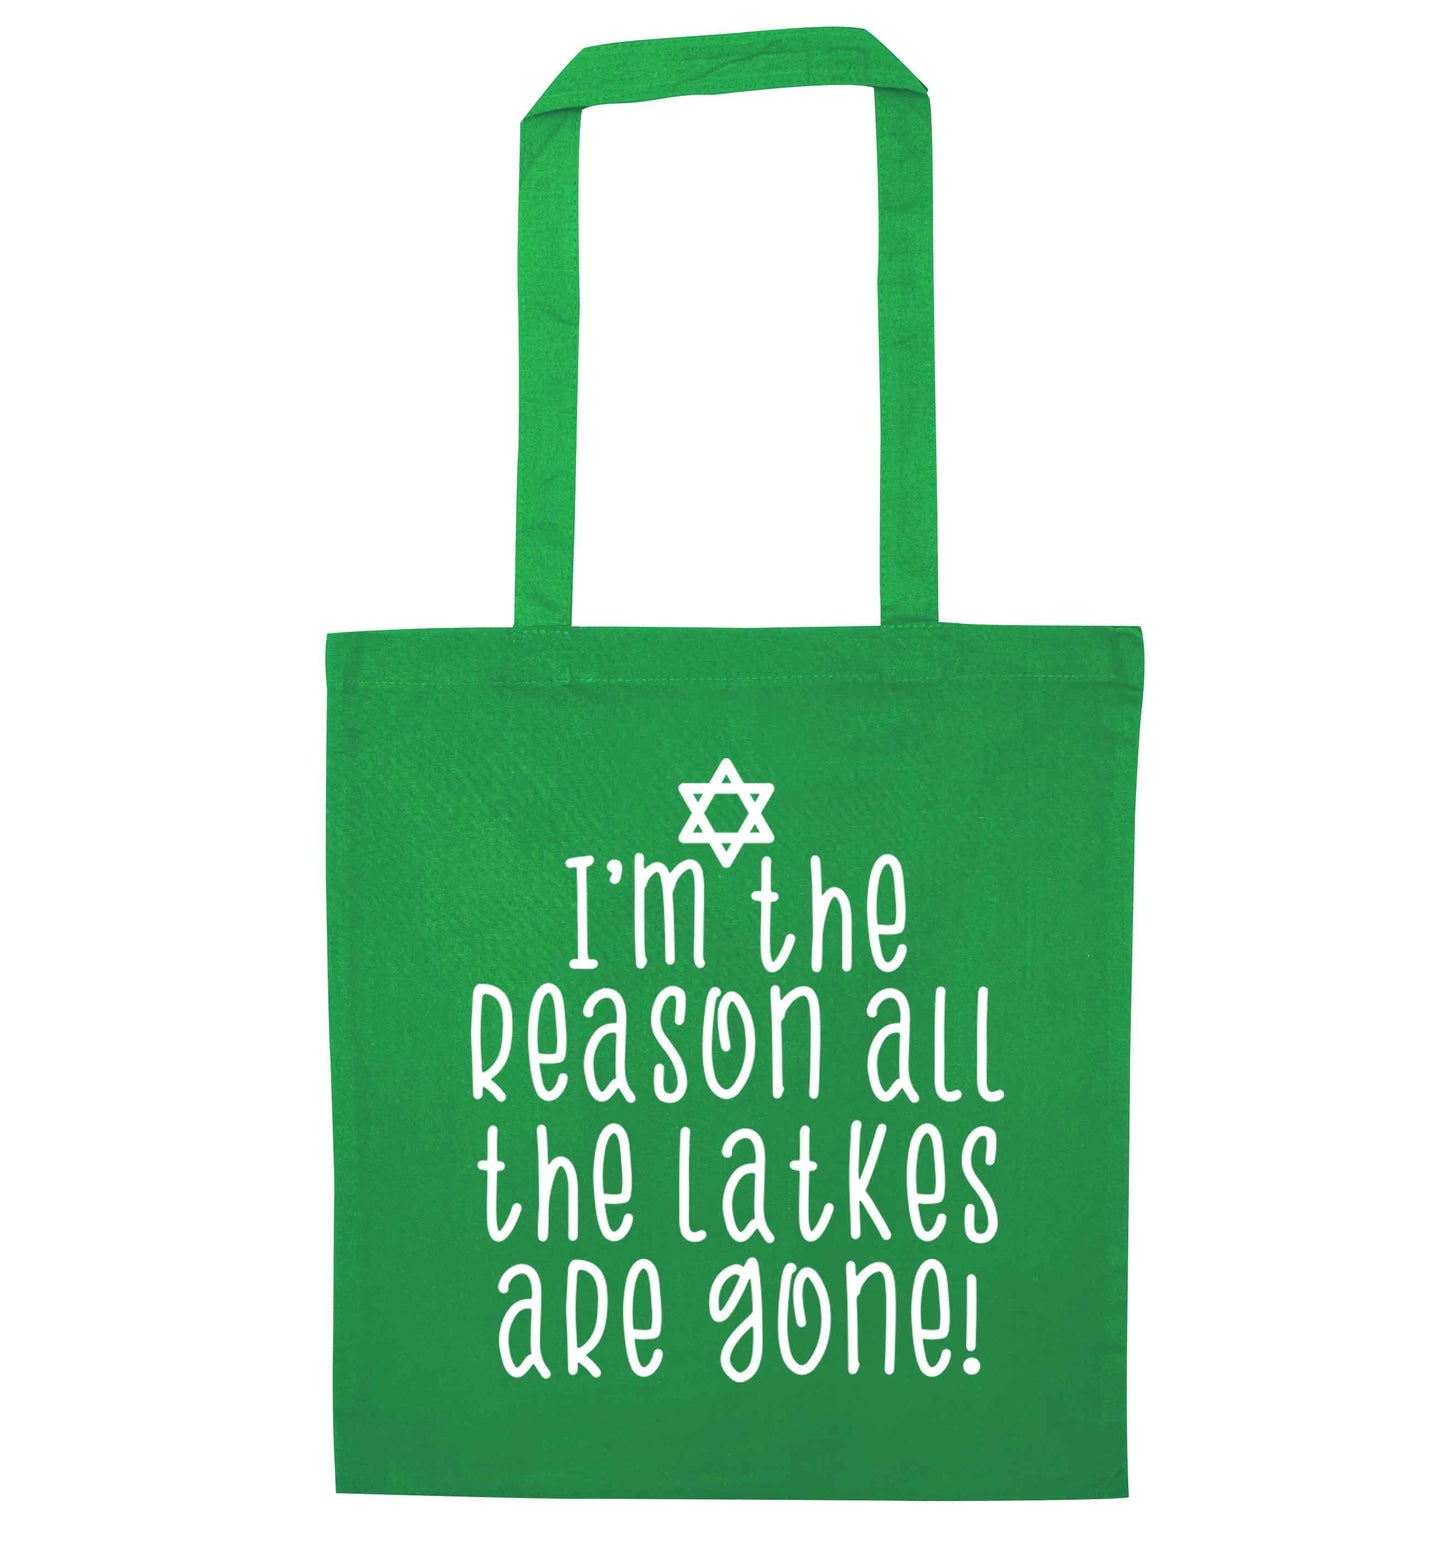 I'm the reason all the latkes are gone green tote bag